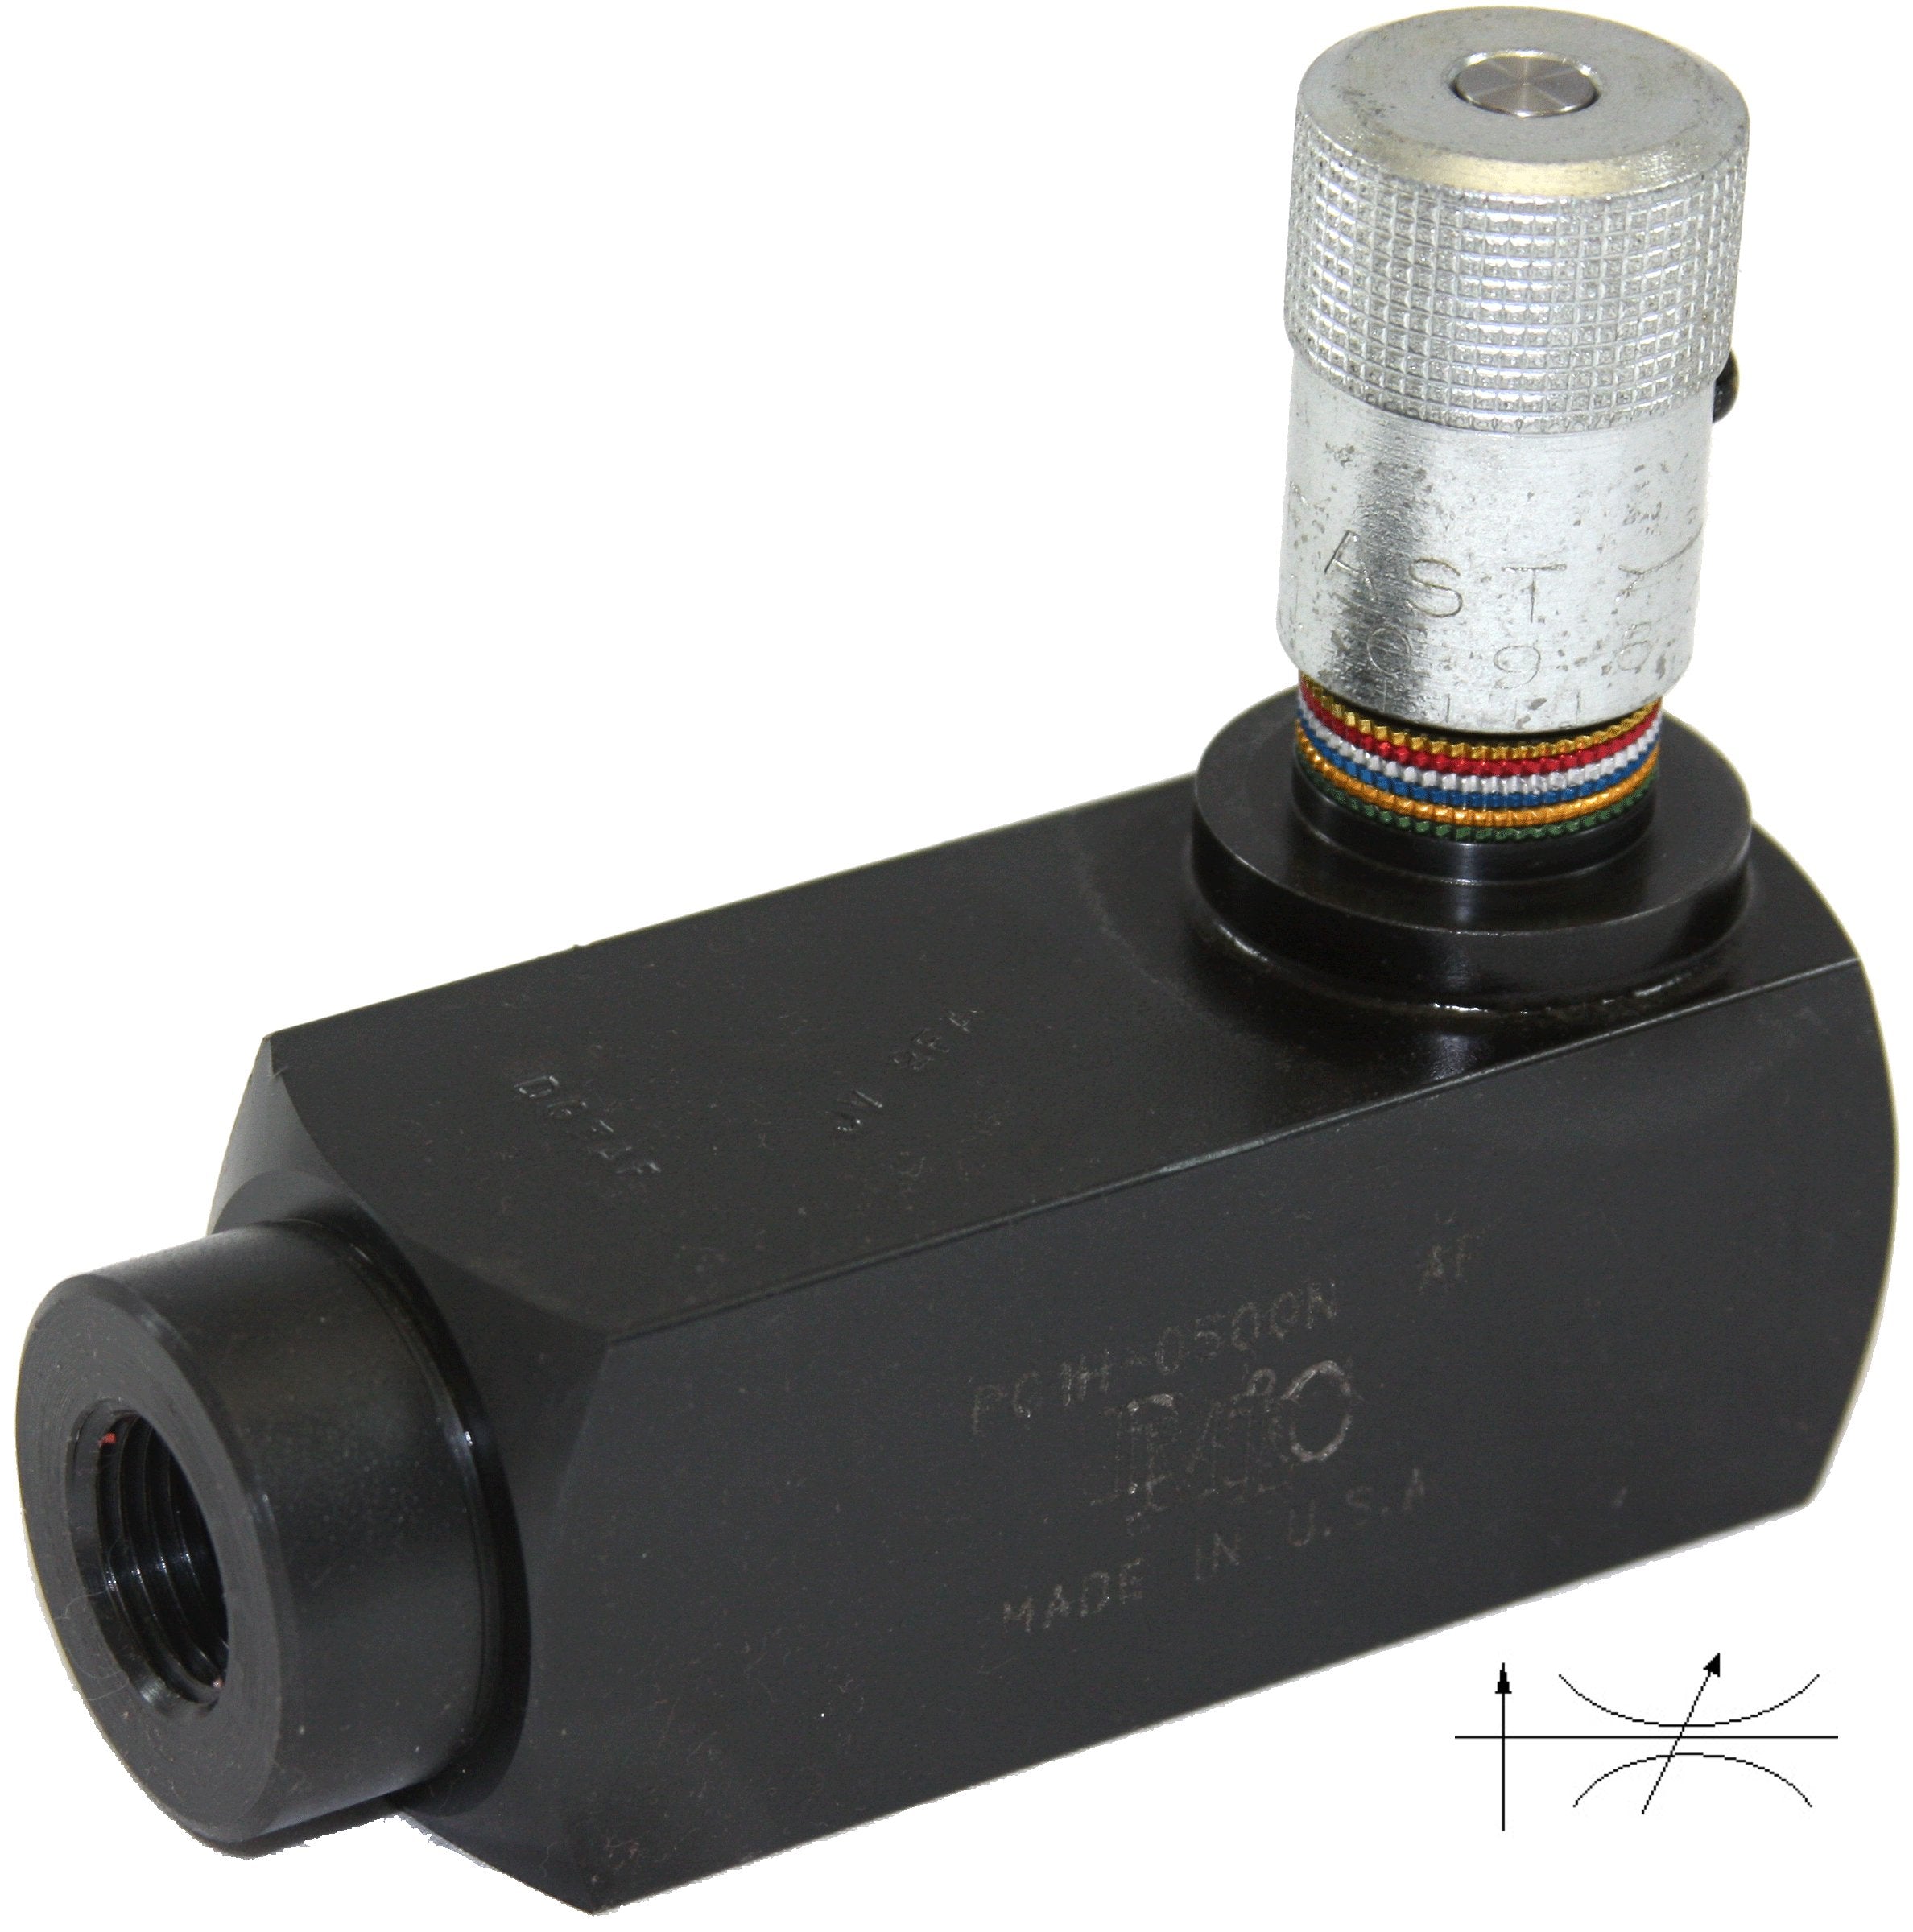 PC1H-0750N : DMIC Pressure Comp Flow Control, Unidirectional, Metered, with Check, 3/4" NPT, 3000psi, Carbon Steel